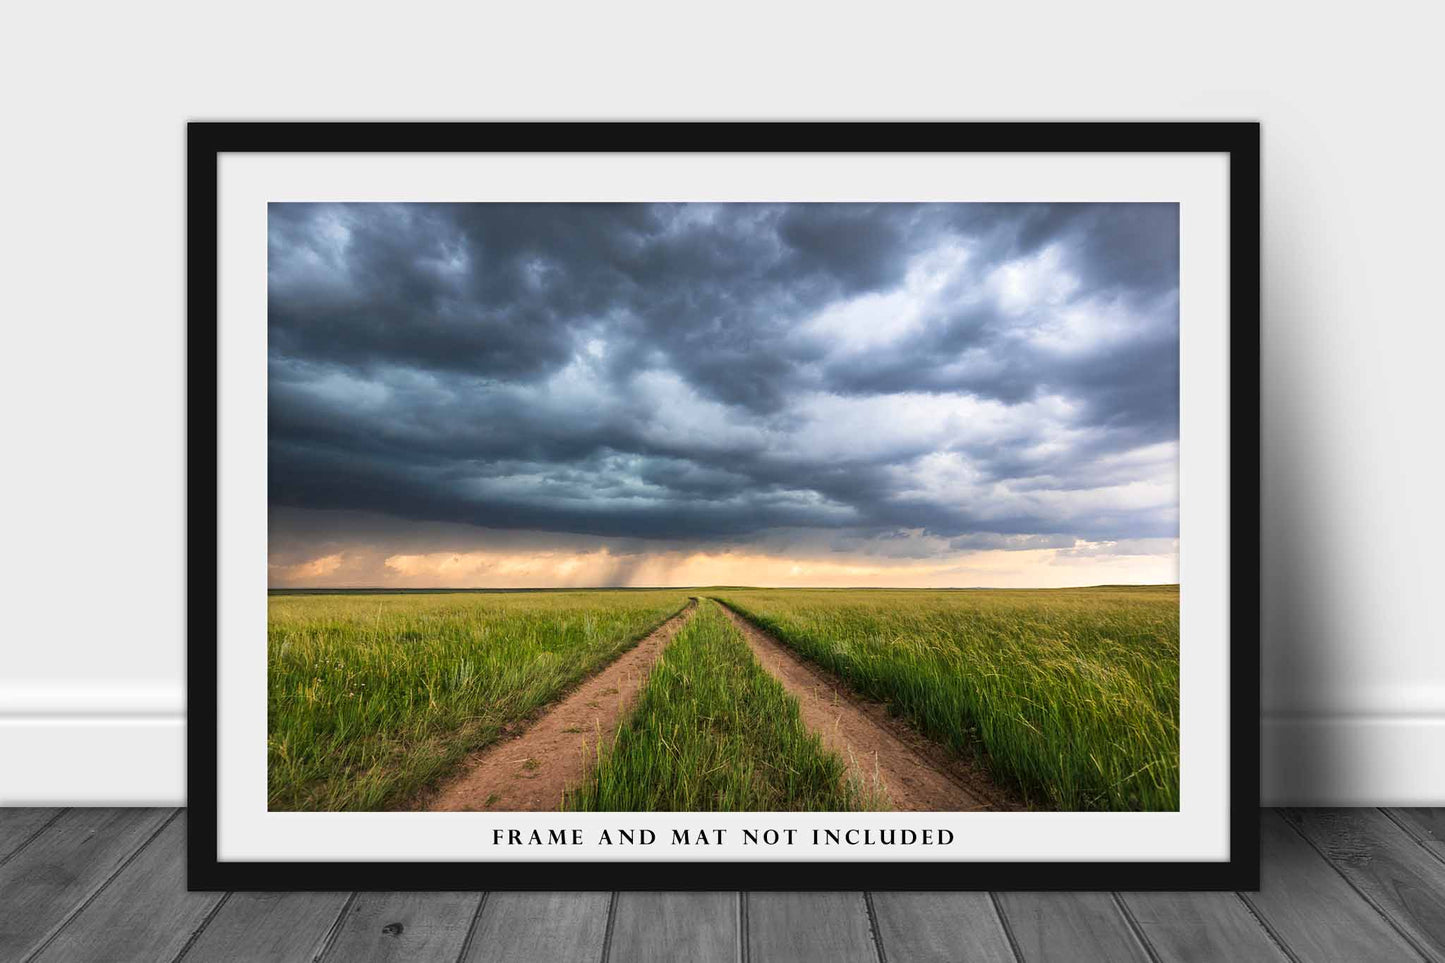 Northern Plains Photography Print (Not Framed) Picture of Wheel Ruts in Prairie Grass on Stormy Day in Wyoming Ranching Wall Art Western Decor